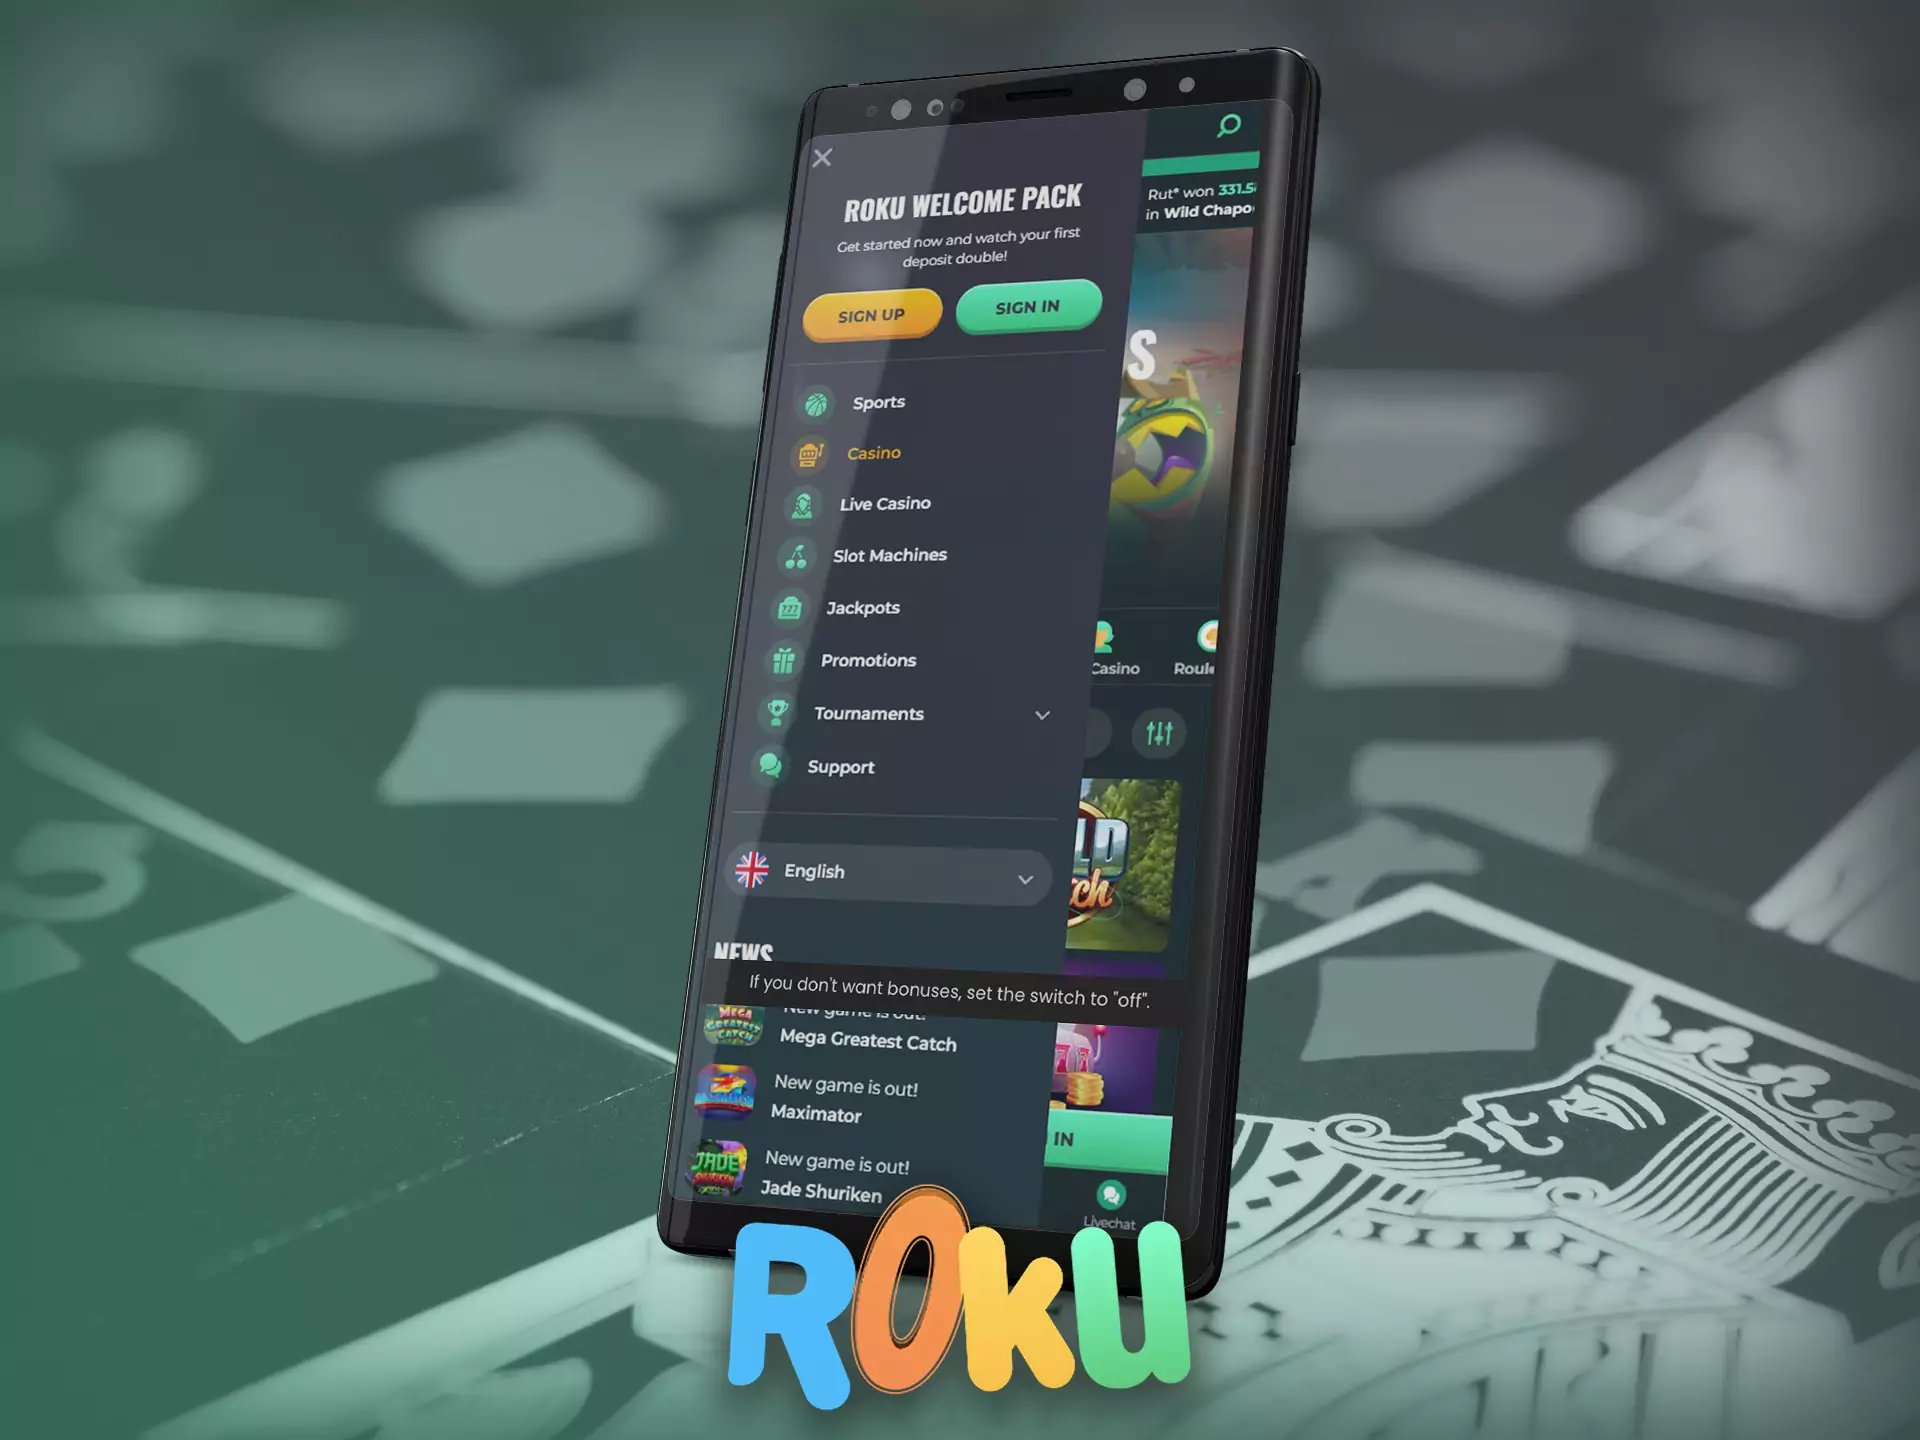 Besides the Rokubet app, you can use the mobile version of the site.